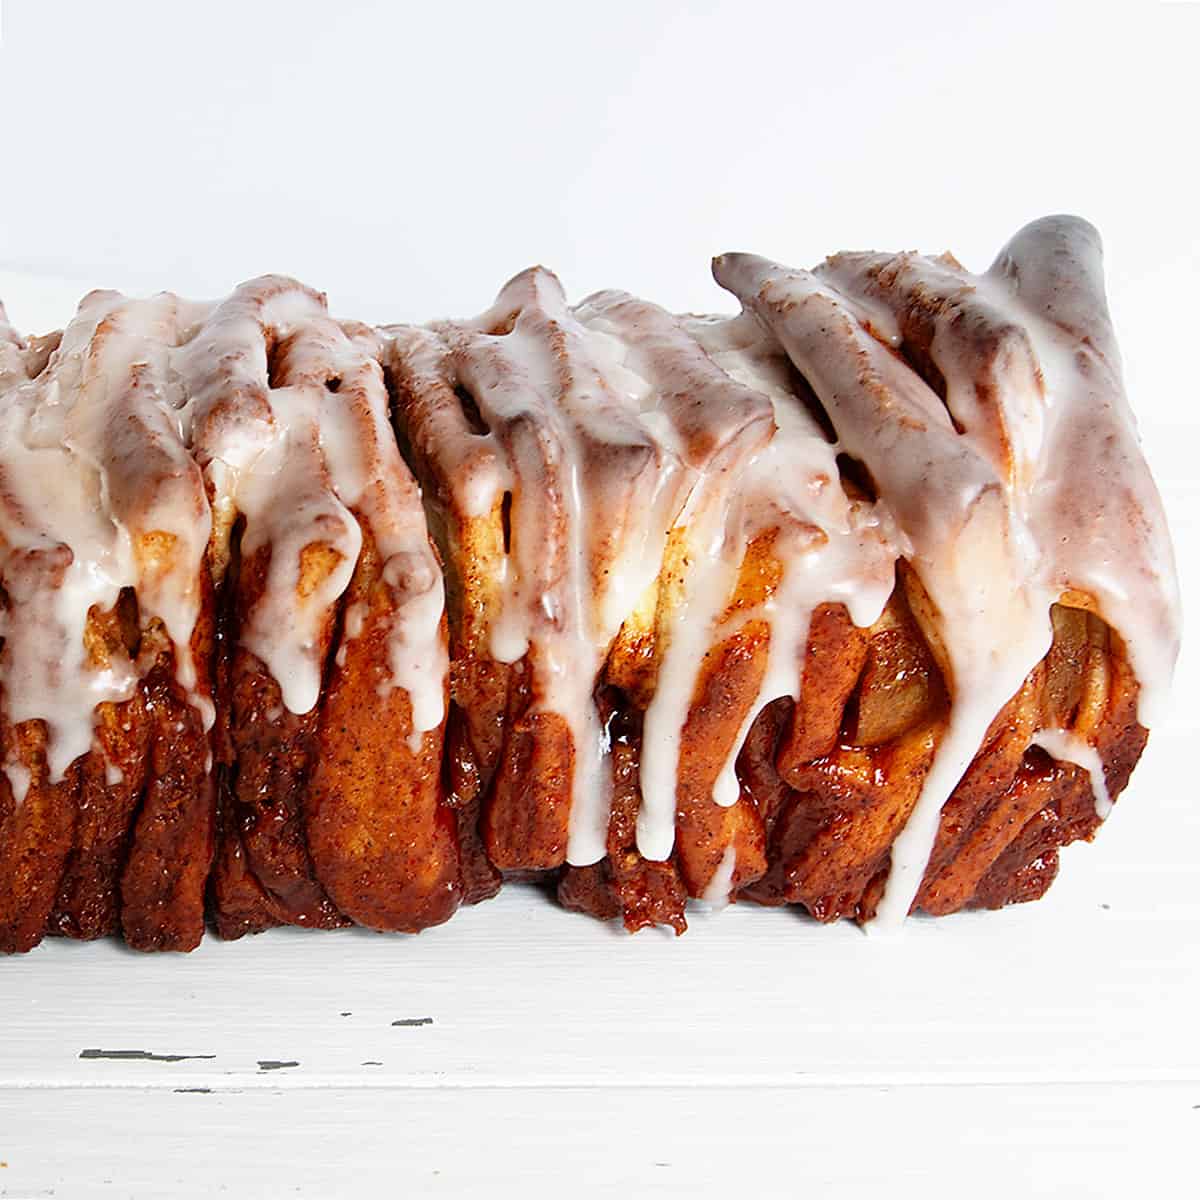 Awesome Country Apple Fritter Bread - The Baking ChocolaTess